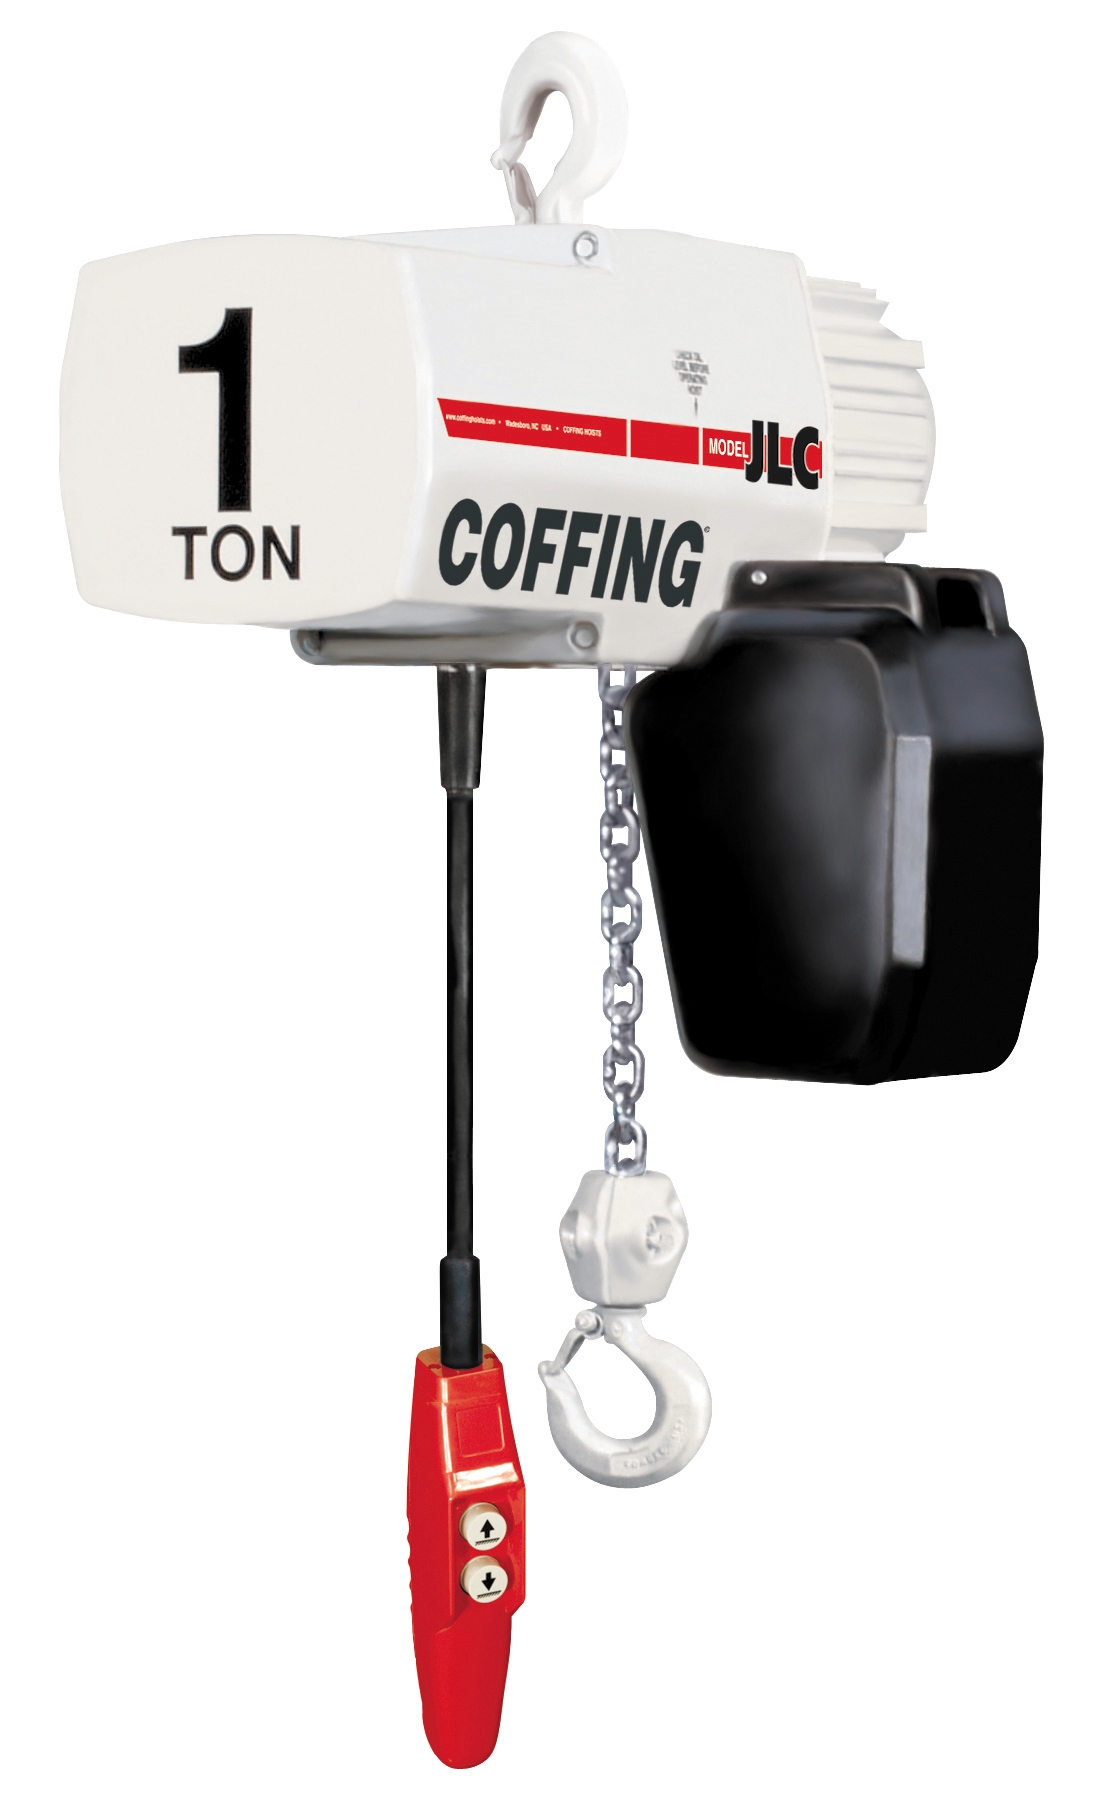 5' Lift 1 Ton RA20 Ratchet Lever Chain Hoist Made in USA Coffing 05330W